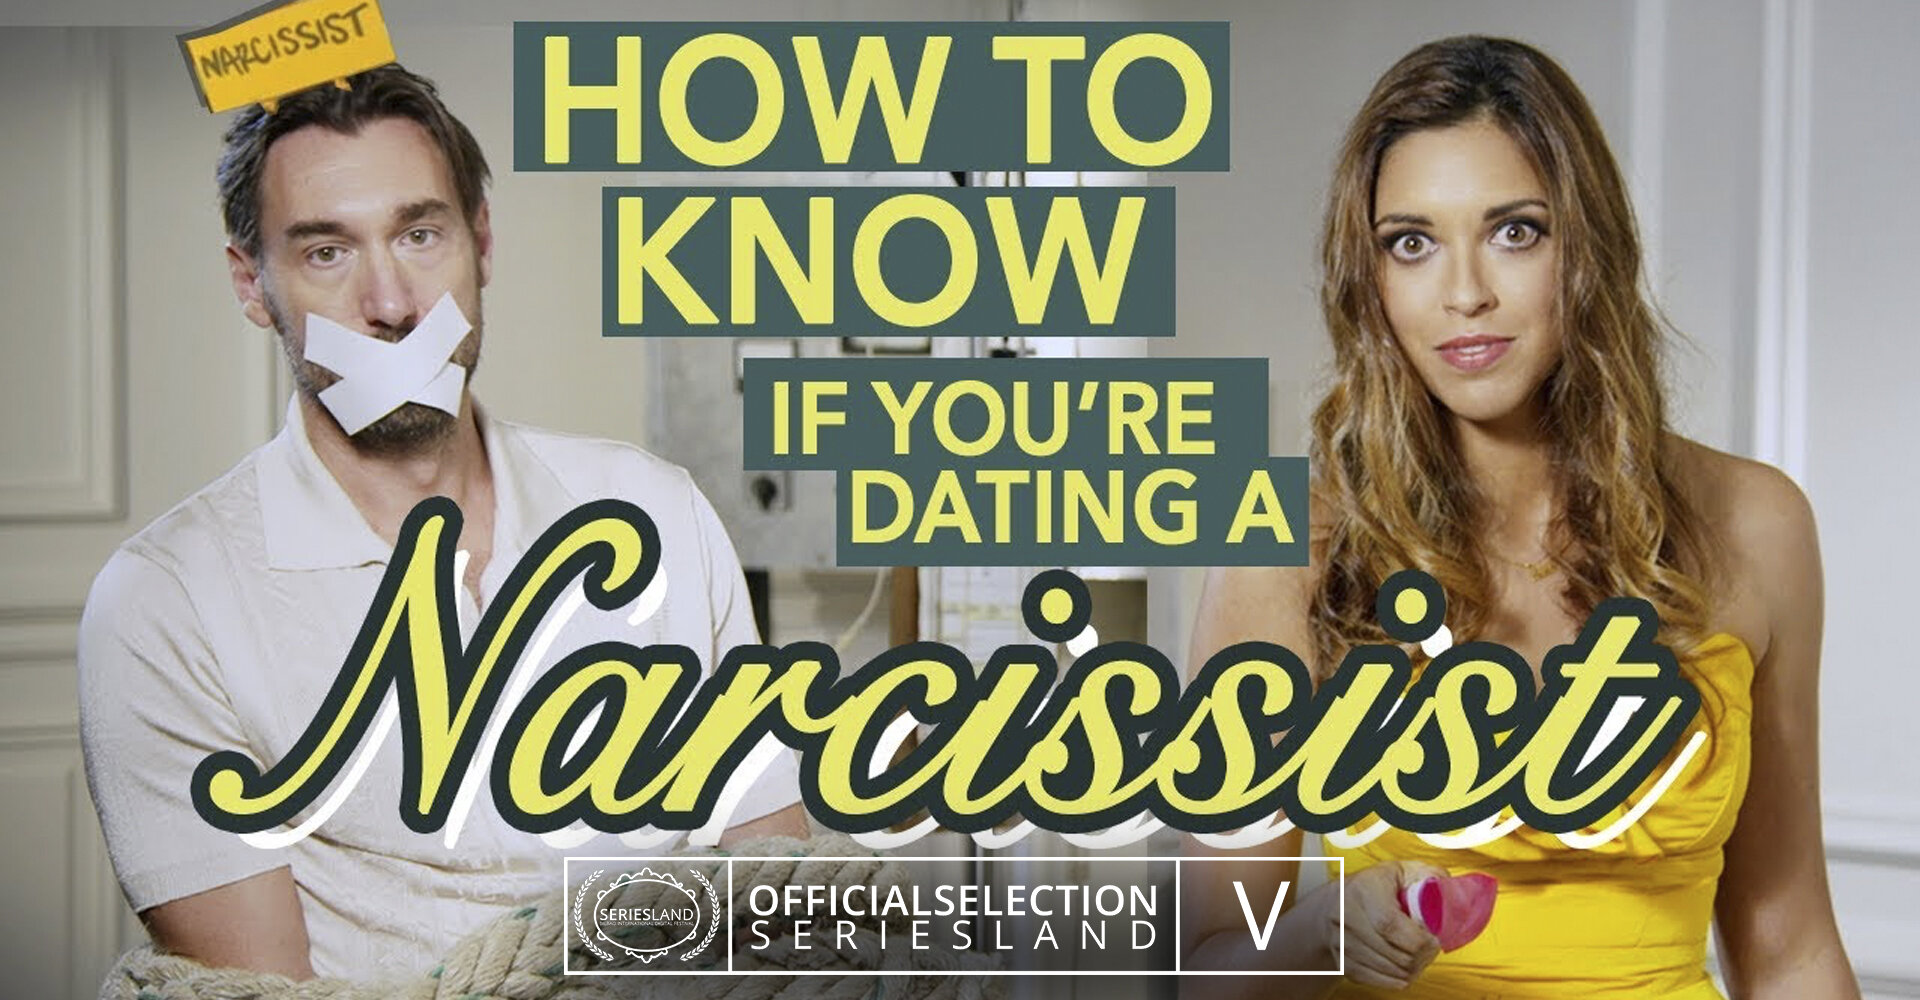 How-To-Know-If-You_re-Dating-a-Narcissist.jpg